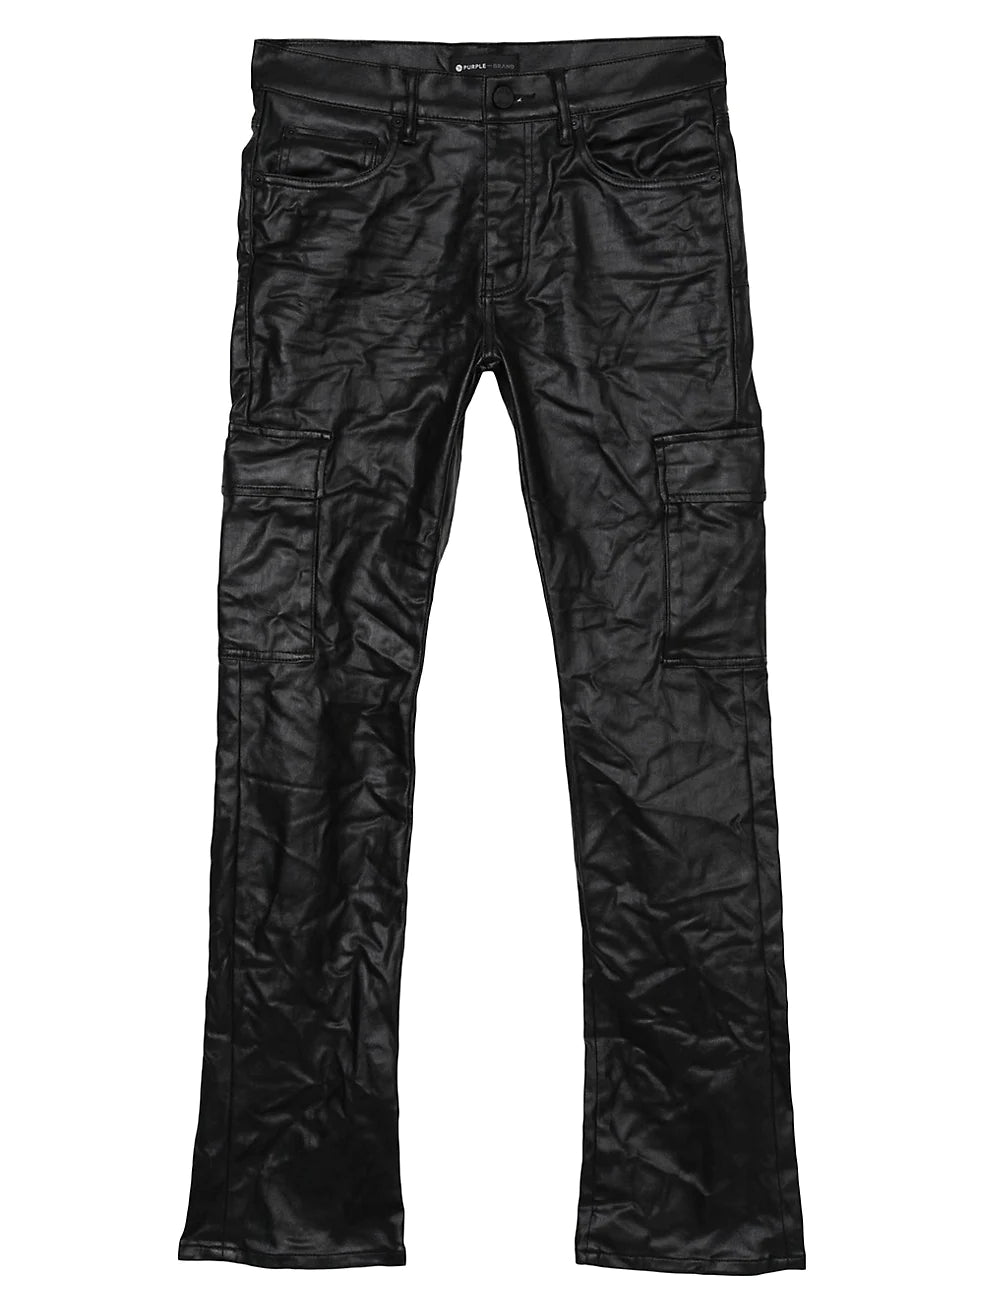 PURPLE BRAND CRINKLED FAUX LEATHER CARGO PANTS FOR RENT